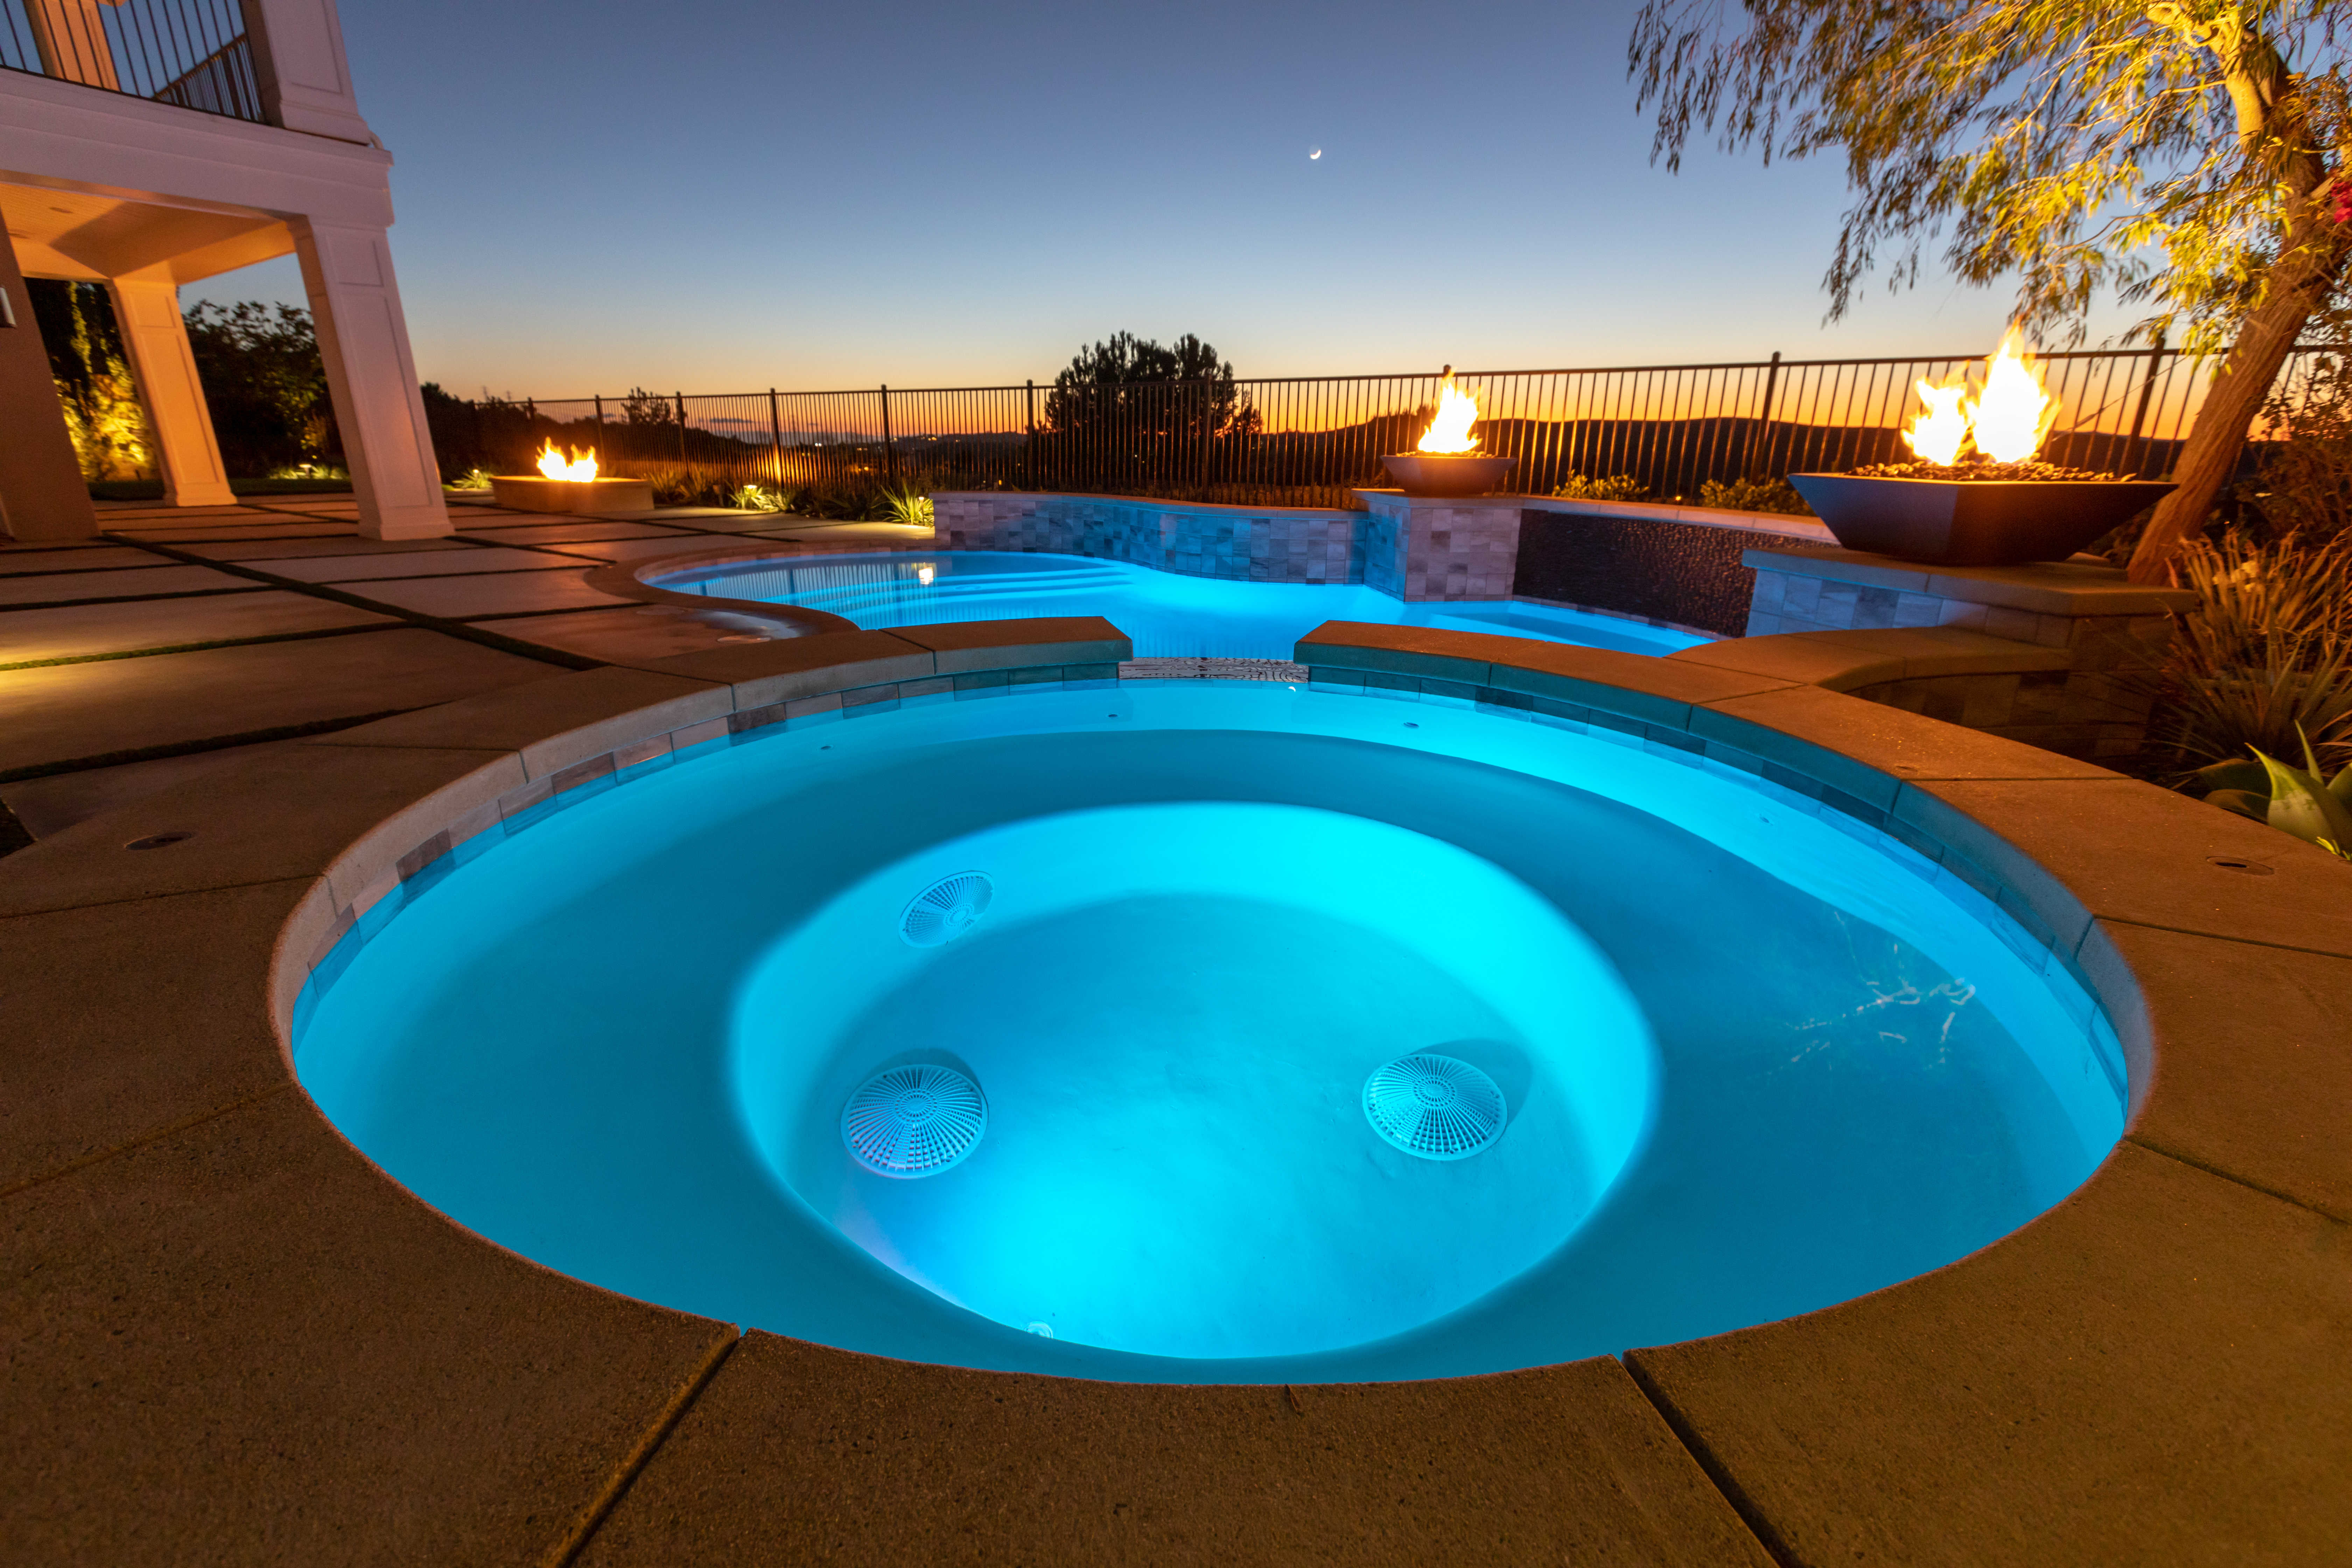 Pool Spa remodel with Fire bowls